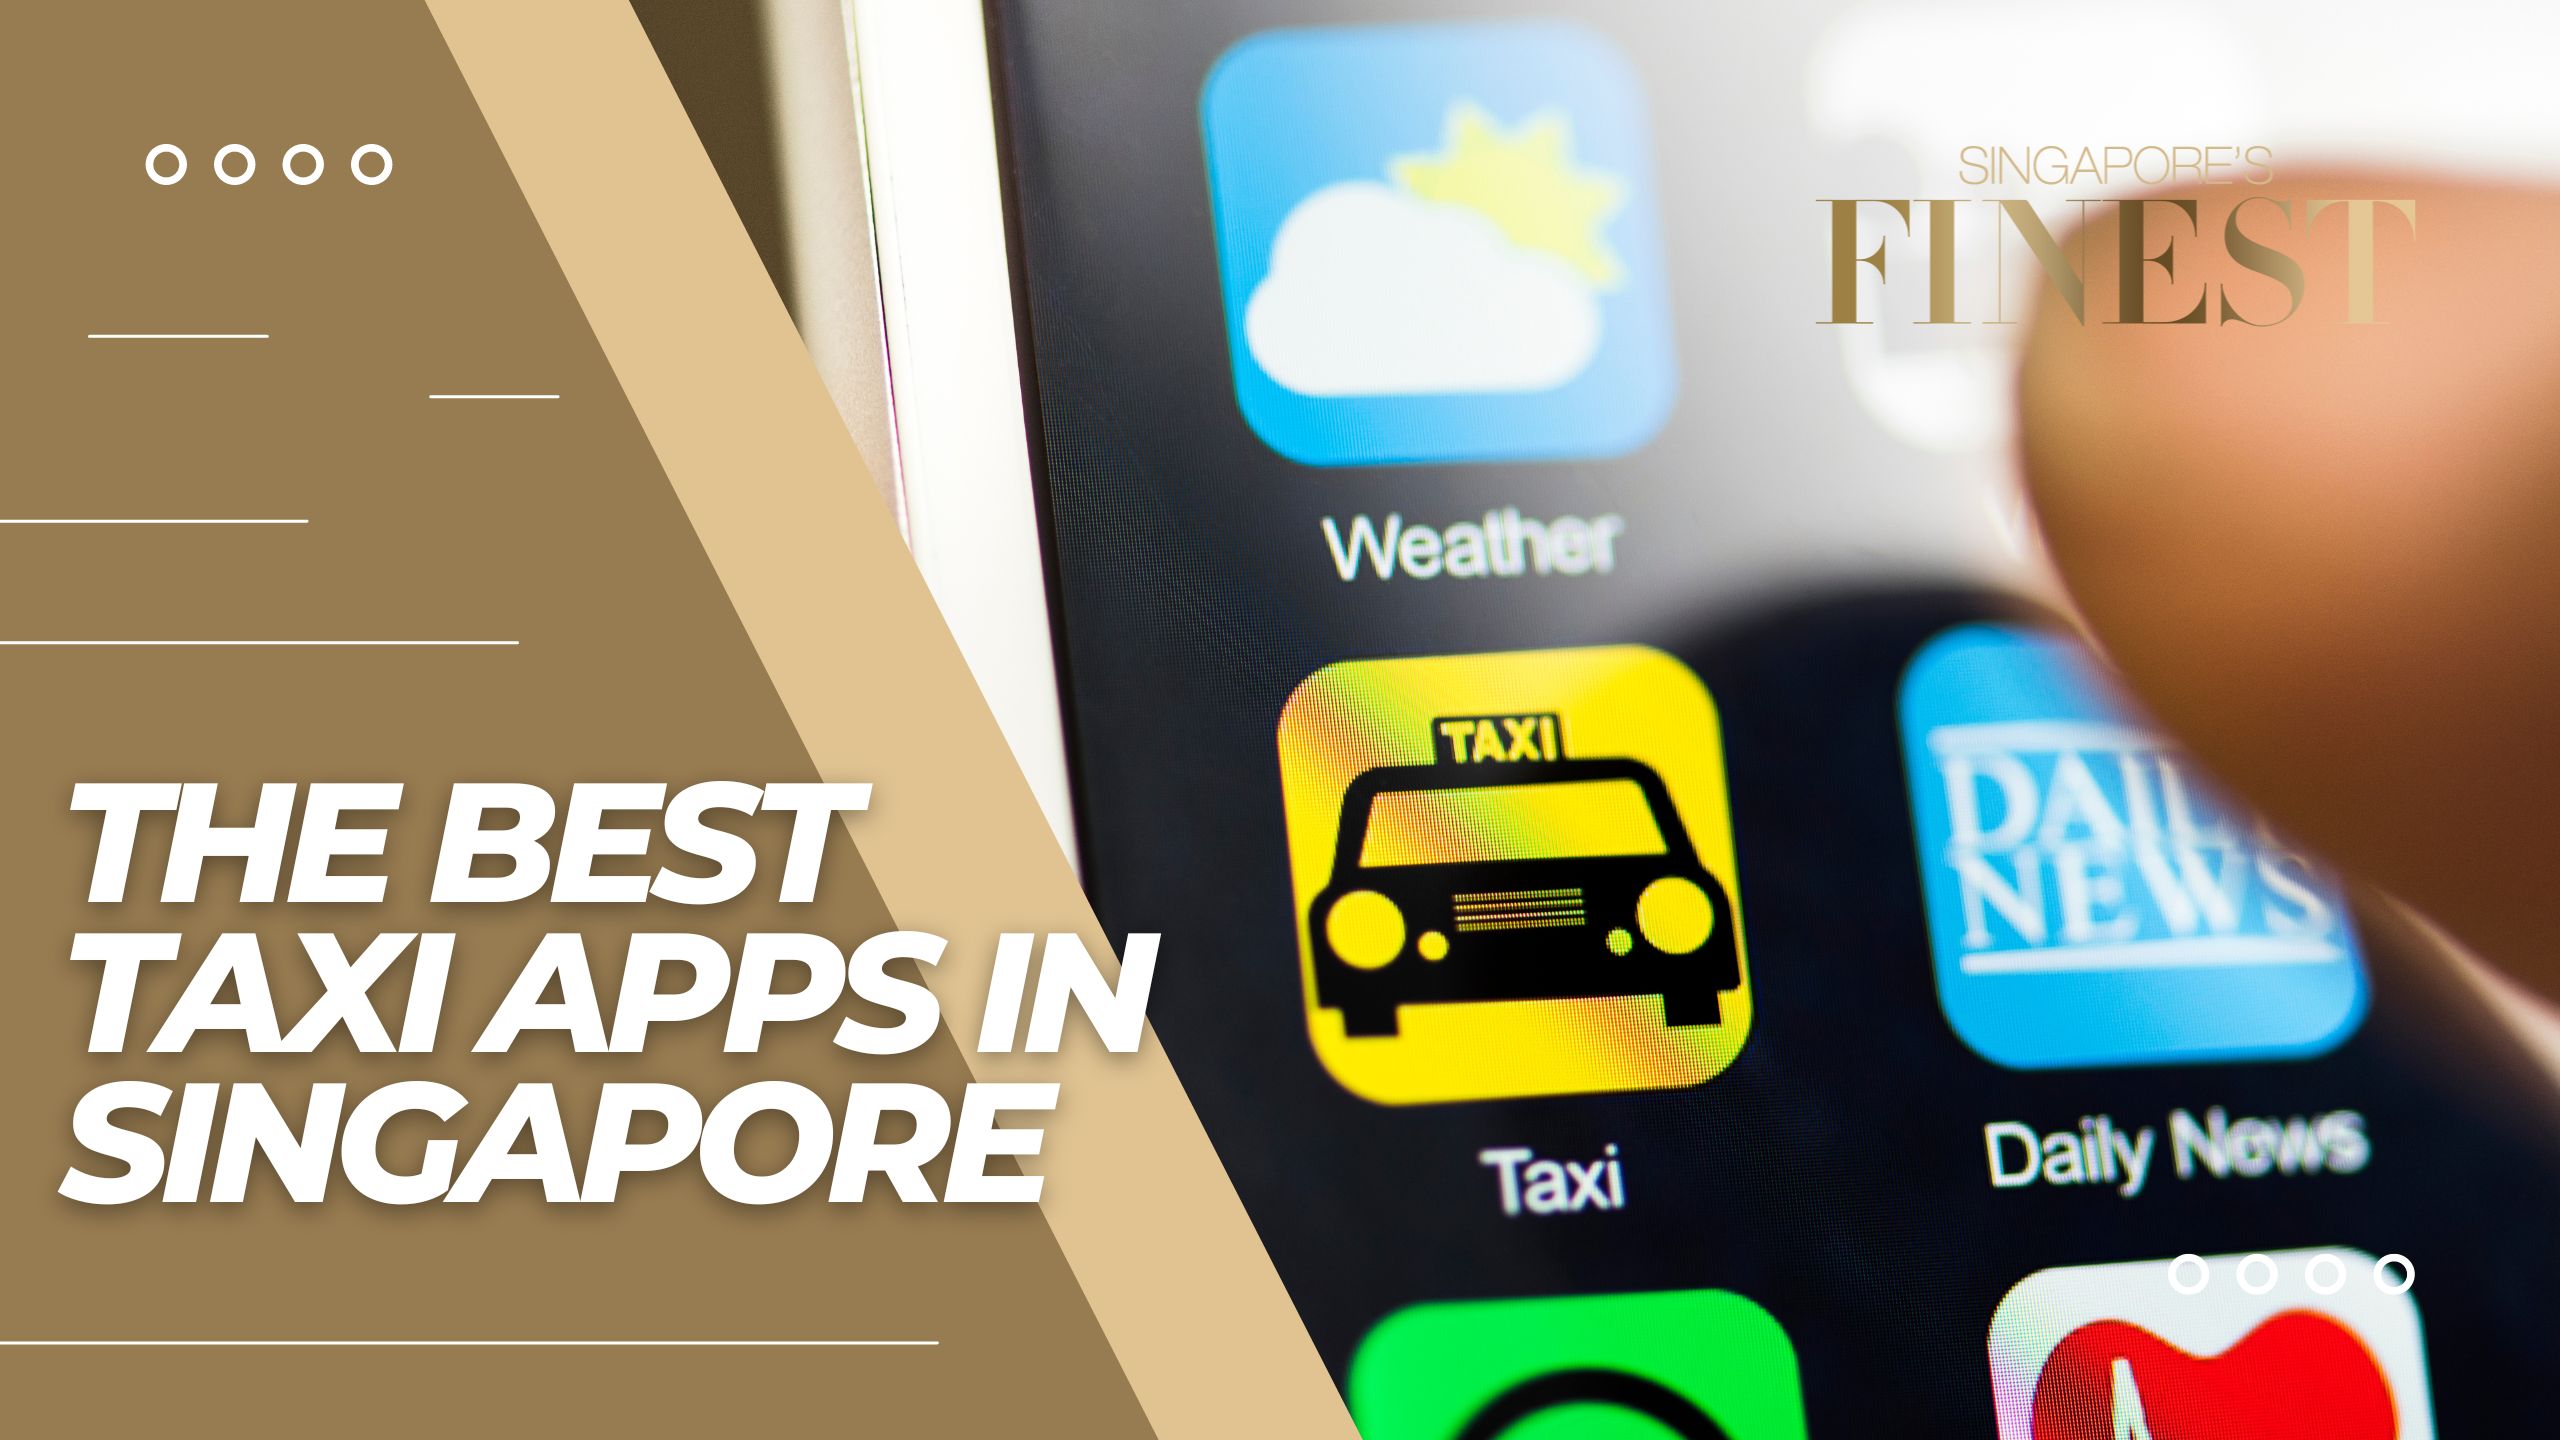 The Finest Taxi Apps in Singapore